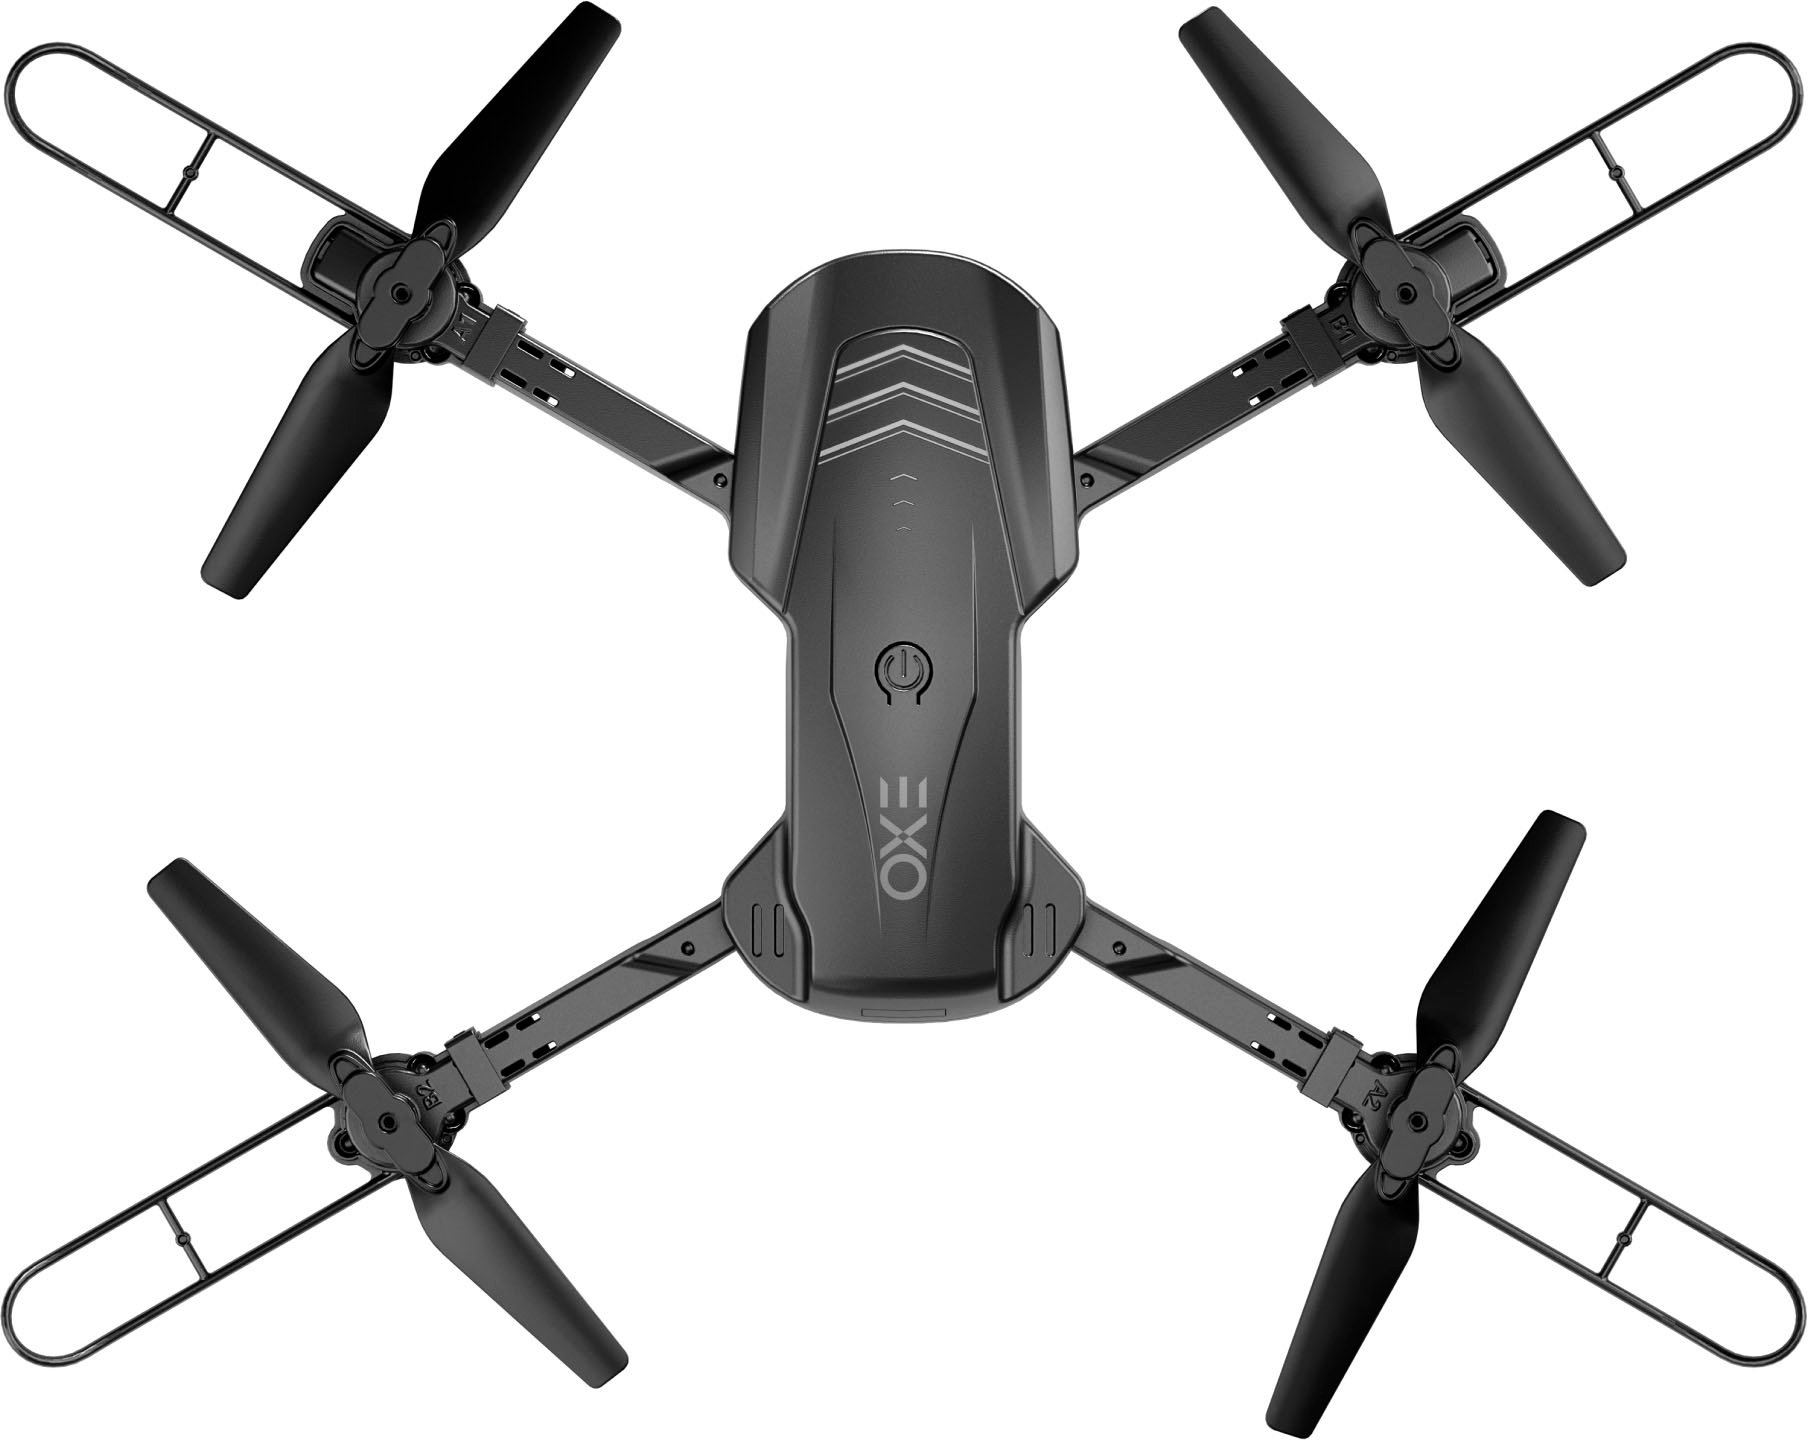 Left View: EXO Drones - Recon Drone and Remote Control (Android and iOS compatible) - Black